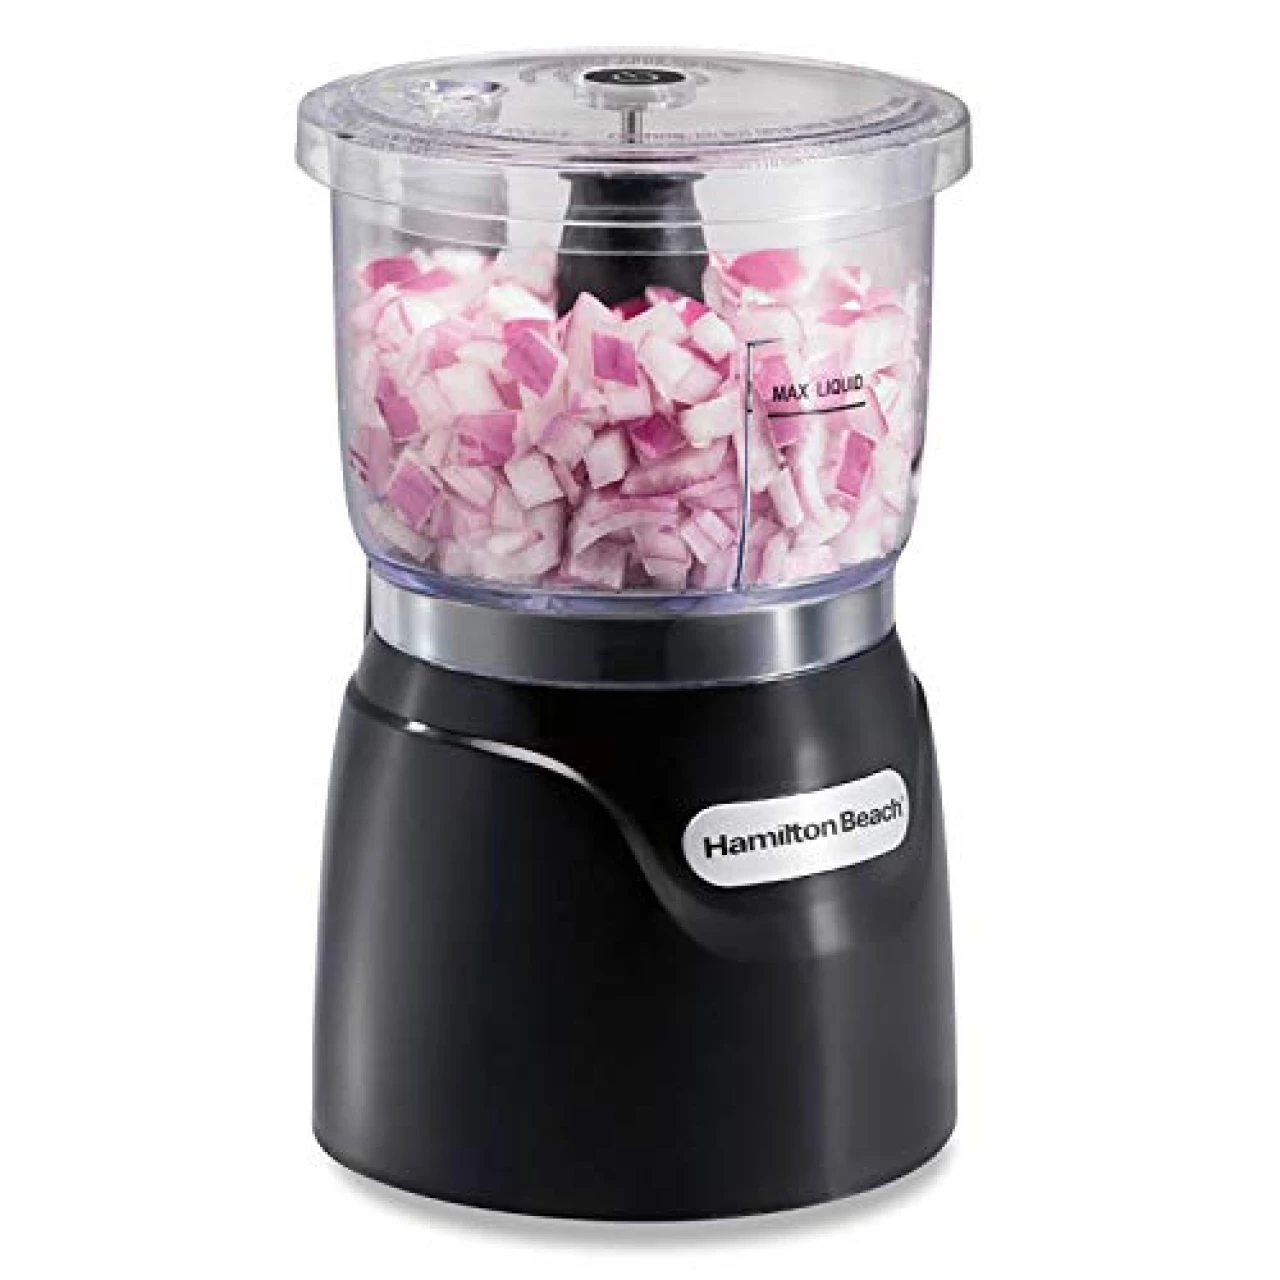 Hamilton Beach Electric Vegetable Chopper &amp; Mini Food Processor, 3-Cup, 350 Watts, for Dicing, Mincing, and Puree, Black (72850)